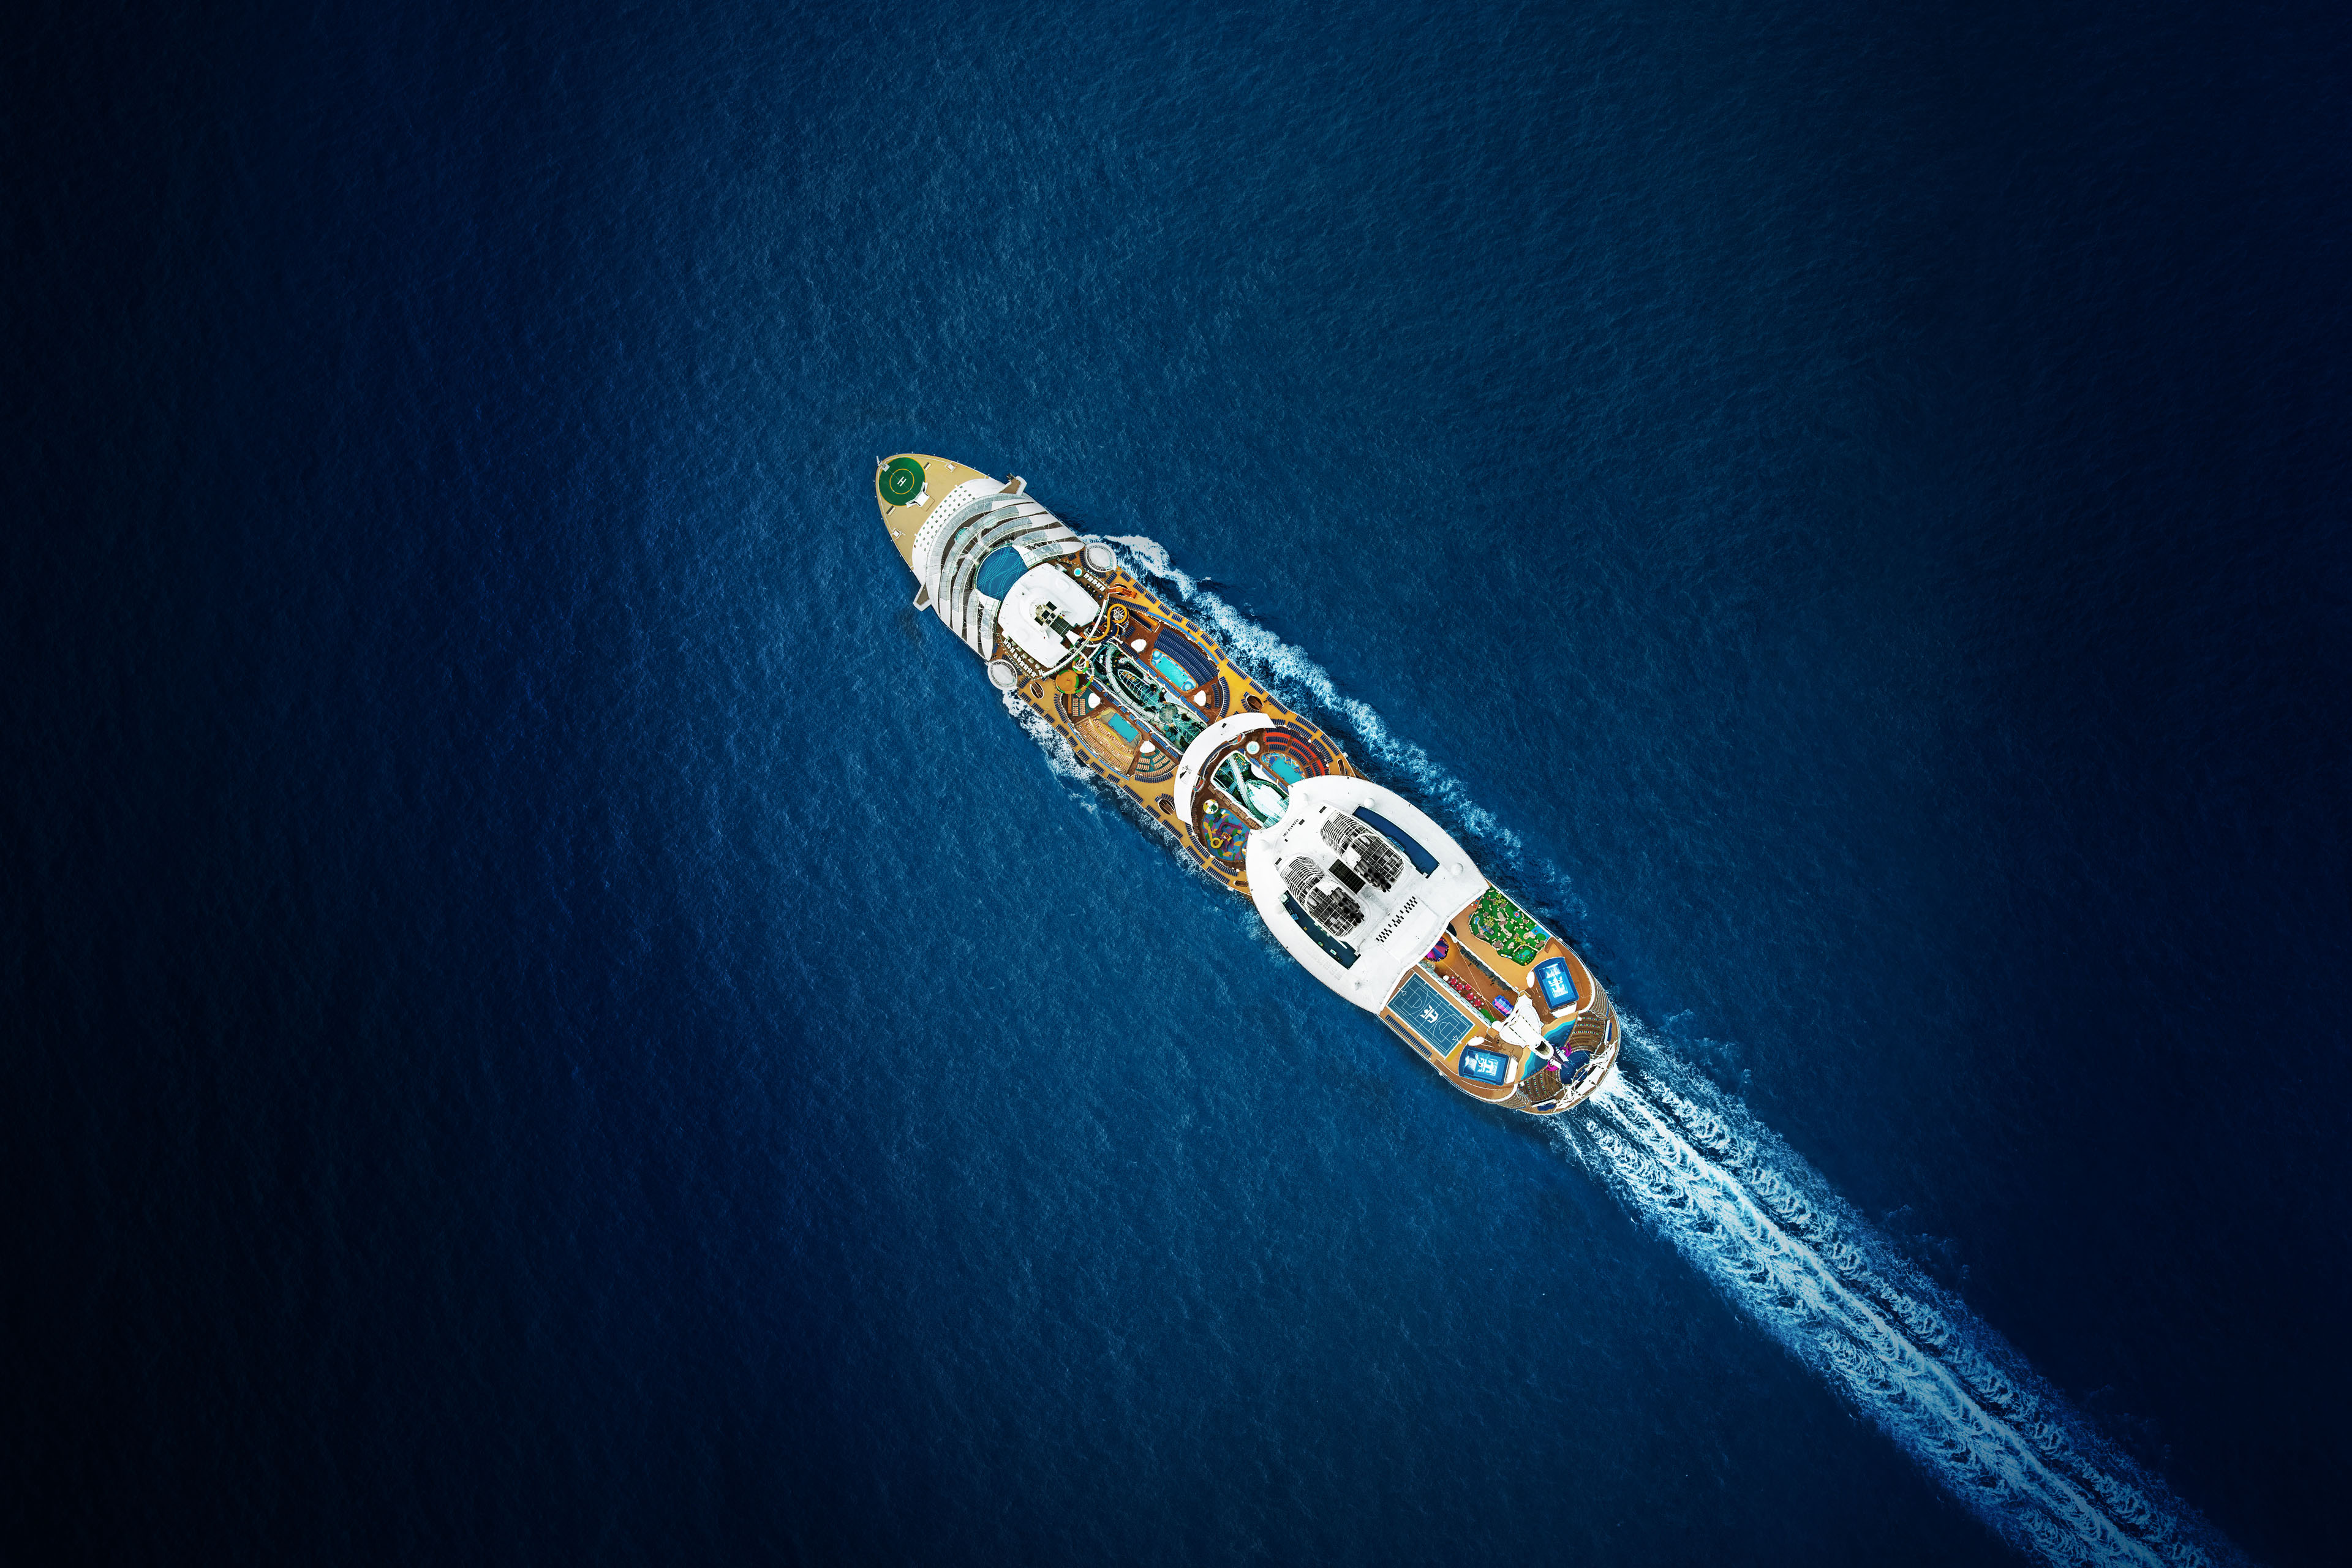 How digital transformation opened new channels for growth. With help from EY professionals, Royal Caribbean’s digital-first approach is transforming their business and the cruising experience.